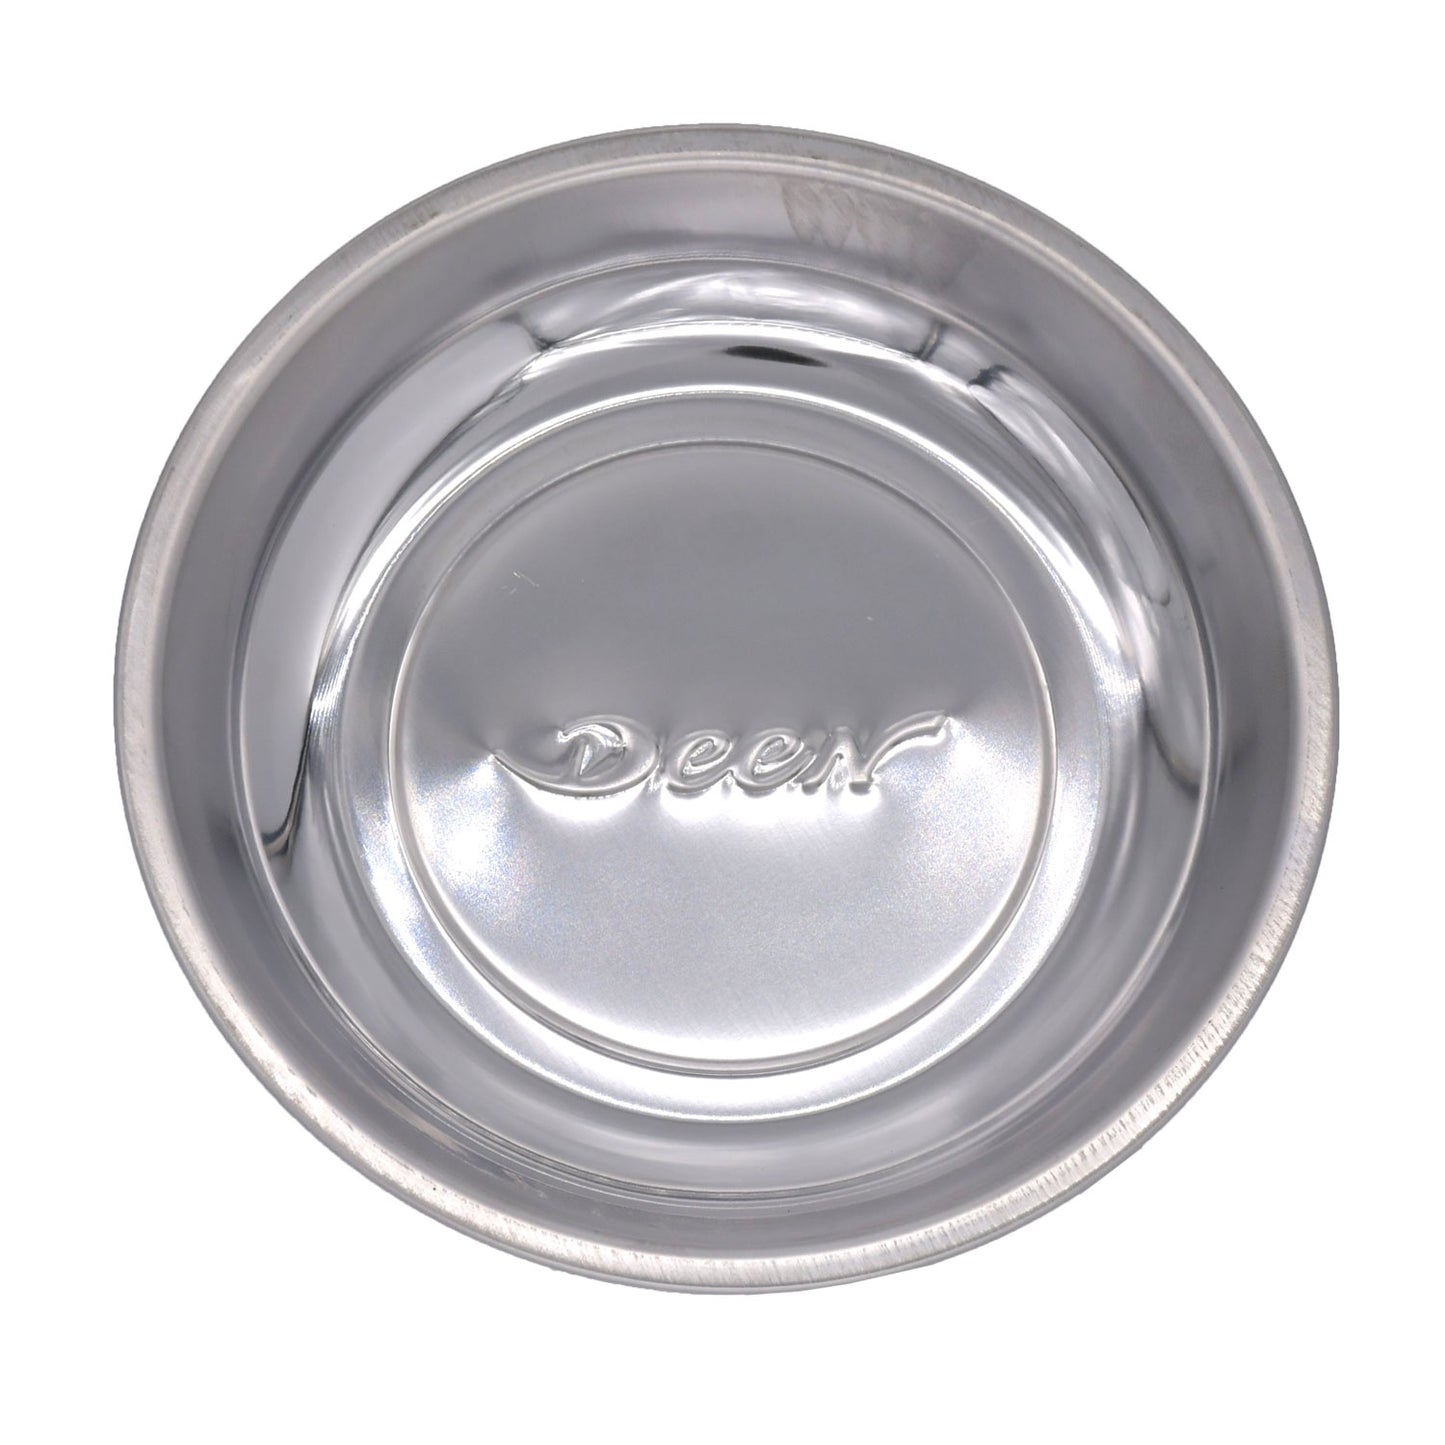 DEEN round parts tray [stainless steel]